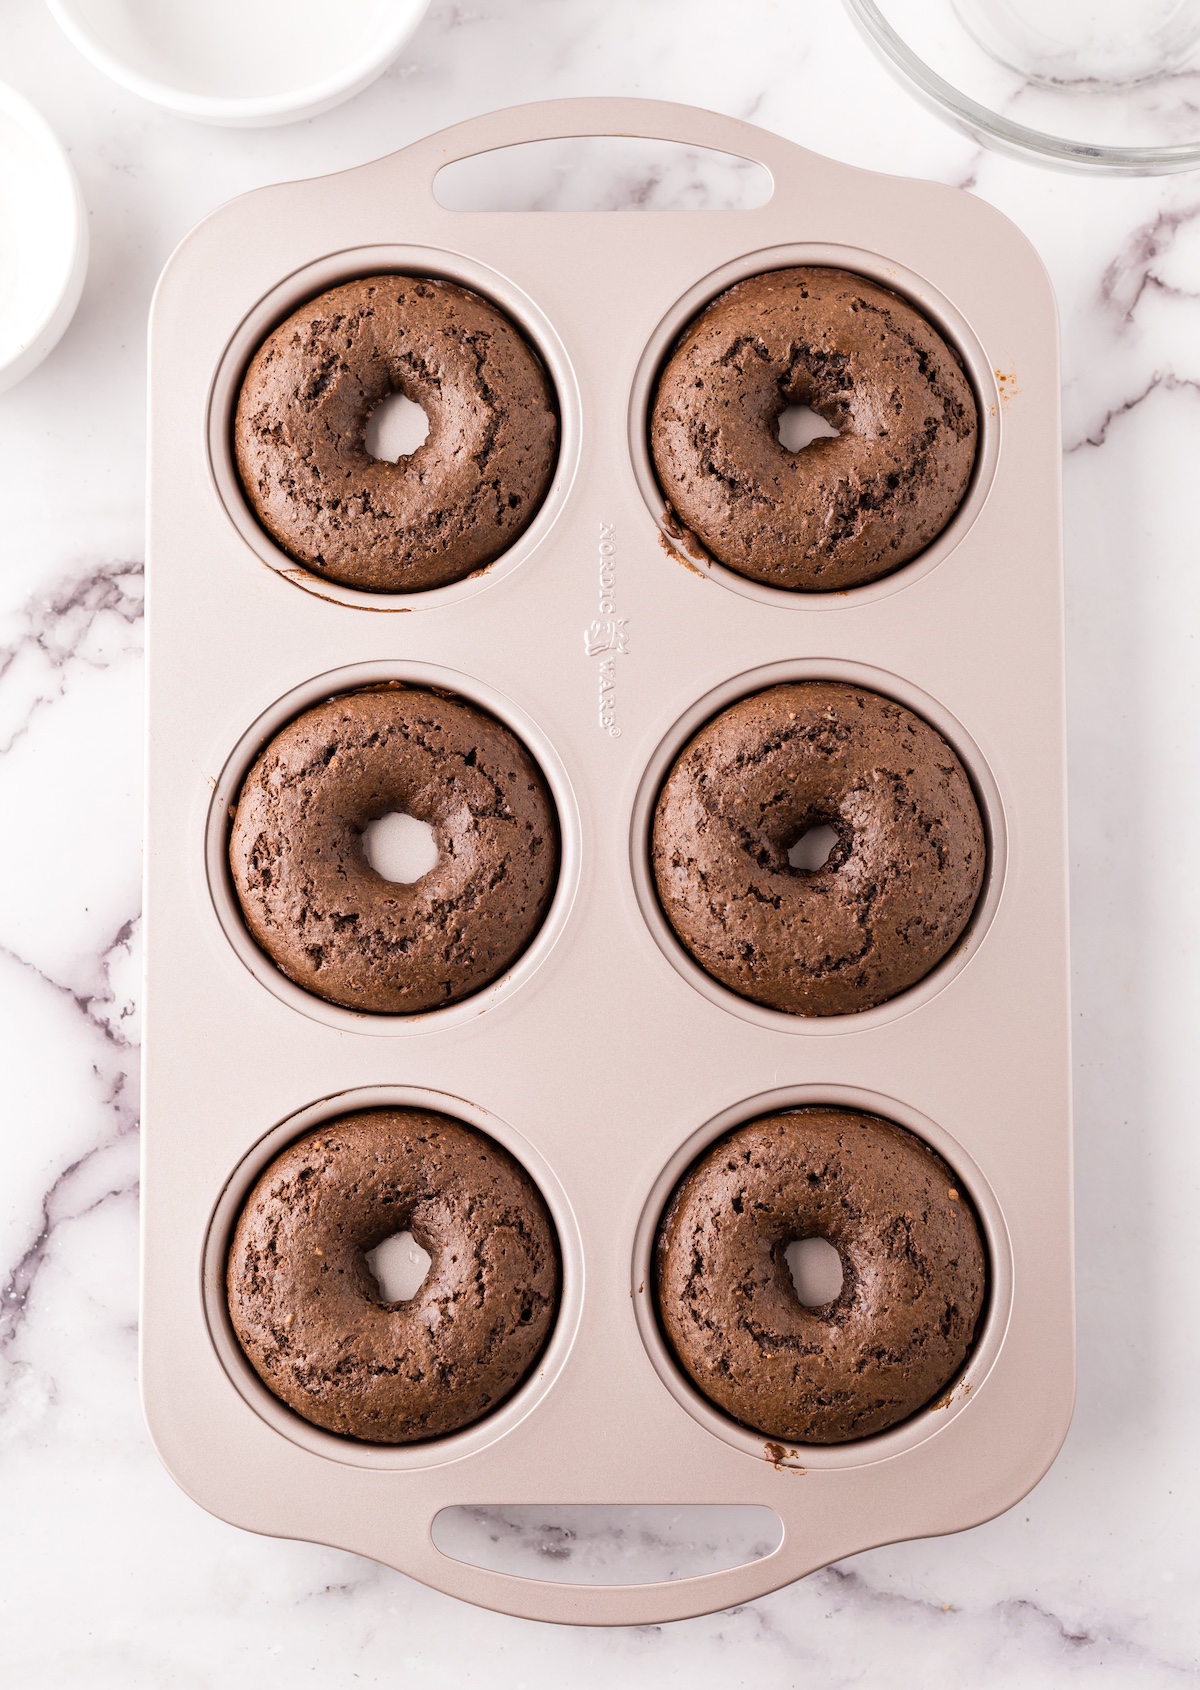 Chocolate donuts baked and cooling in a donut pan